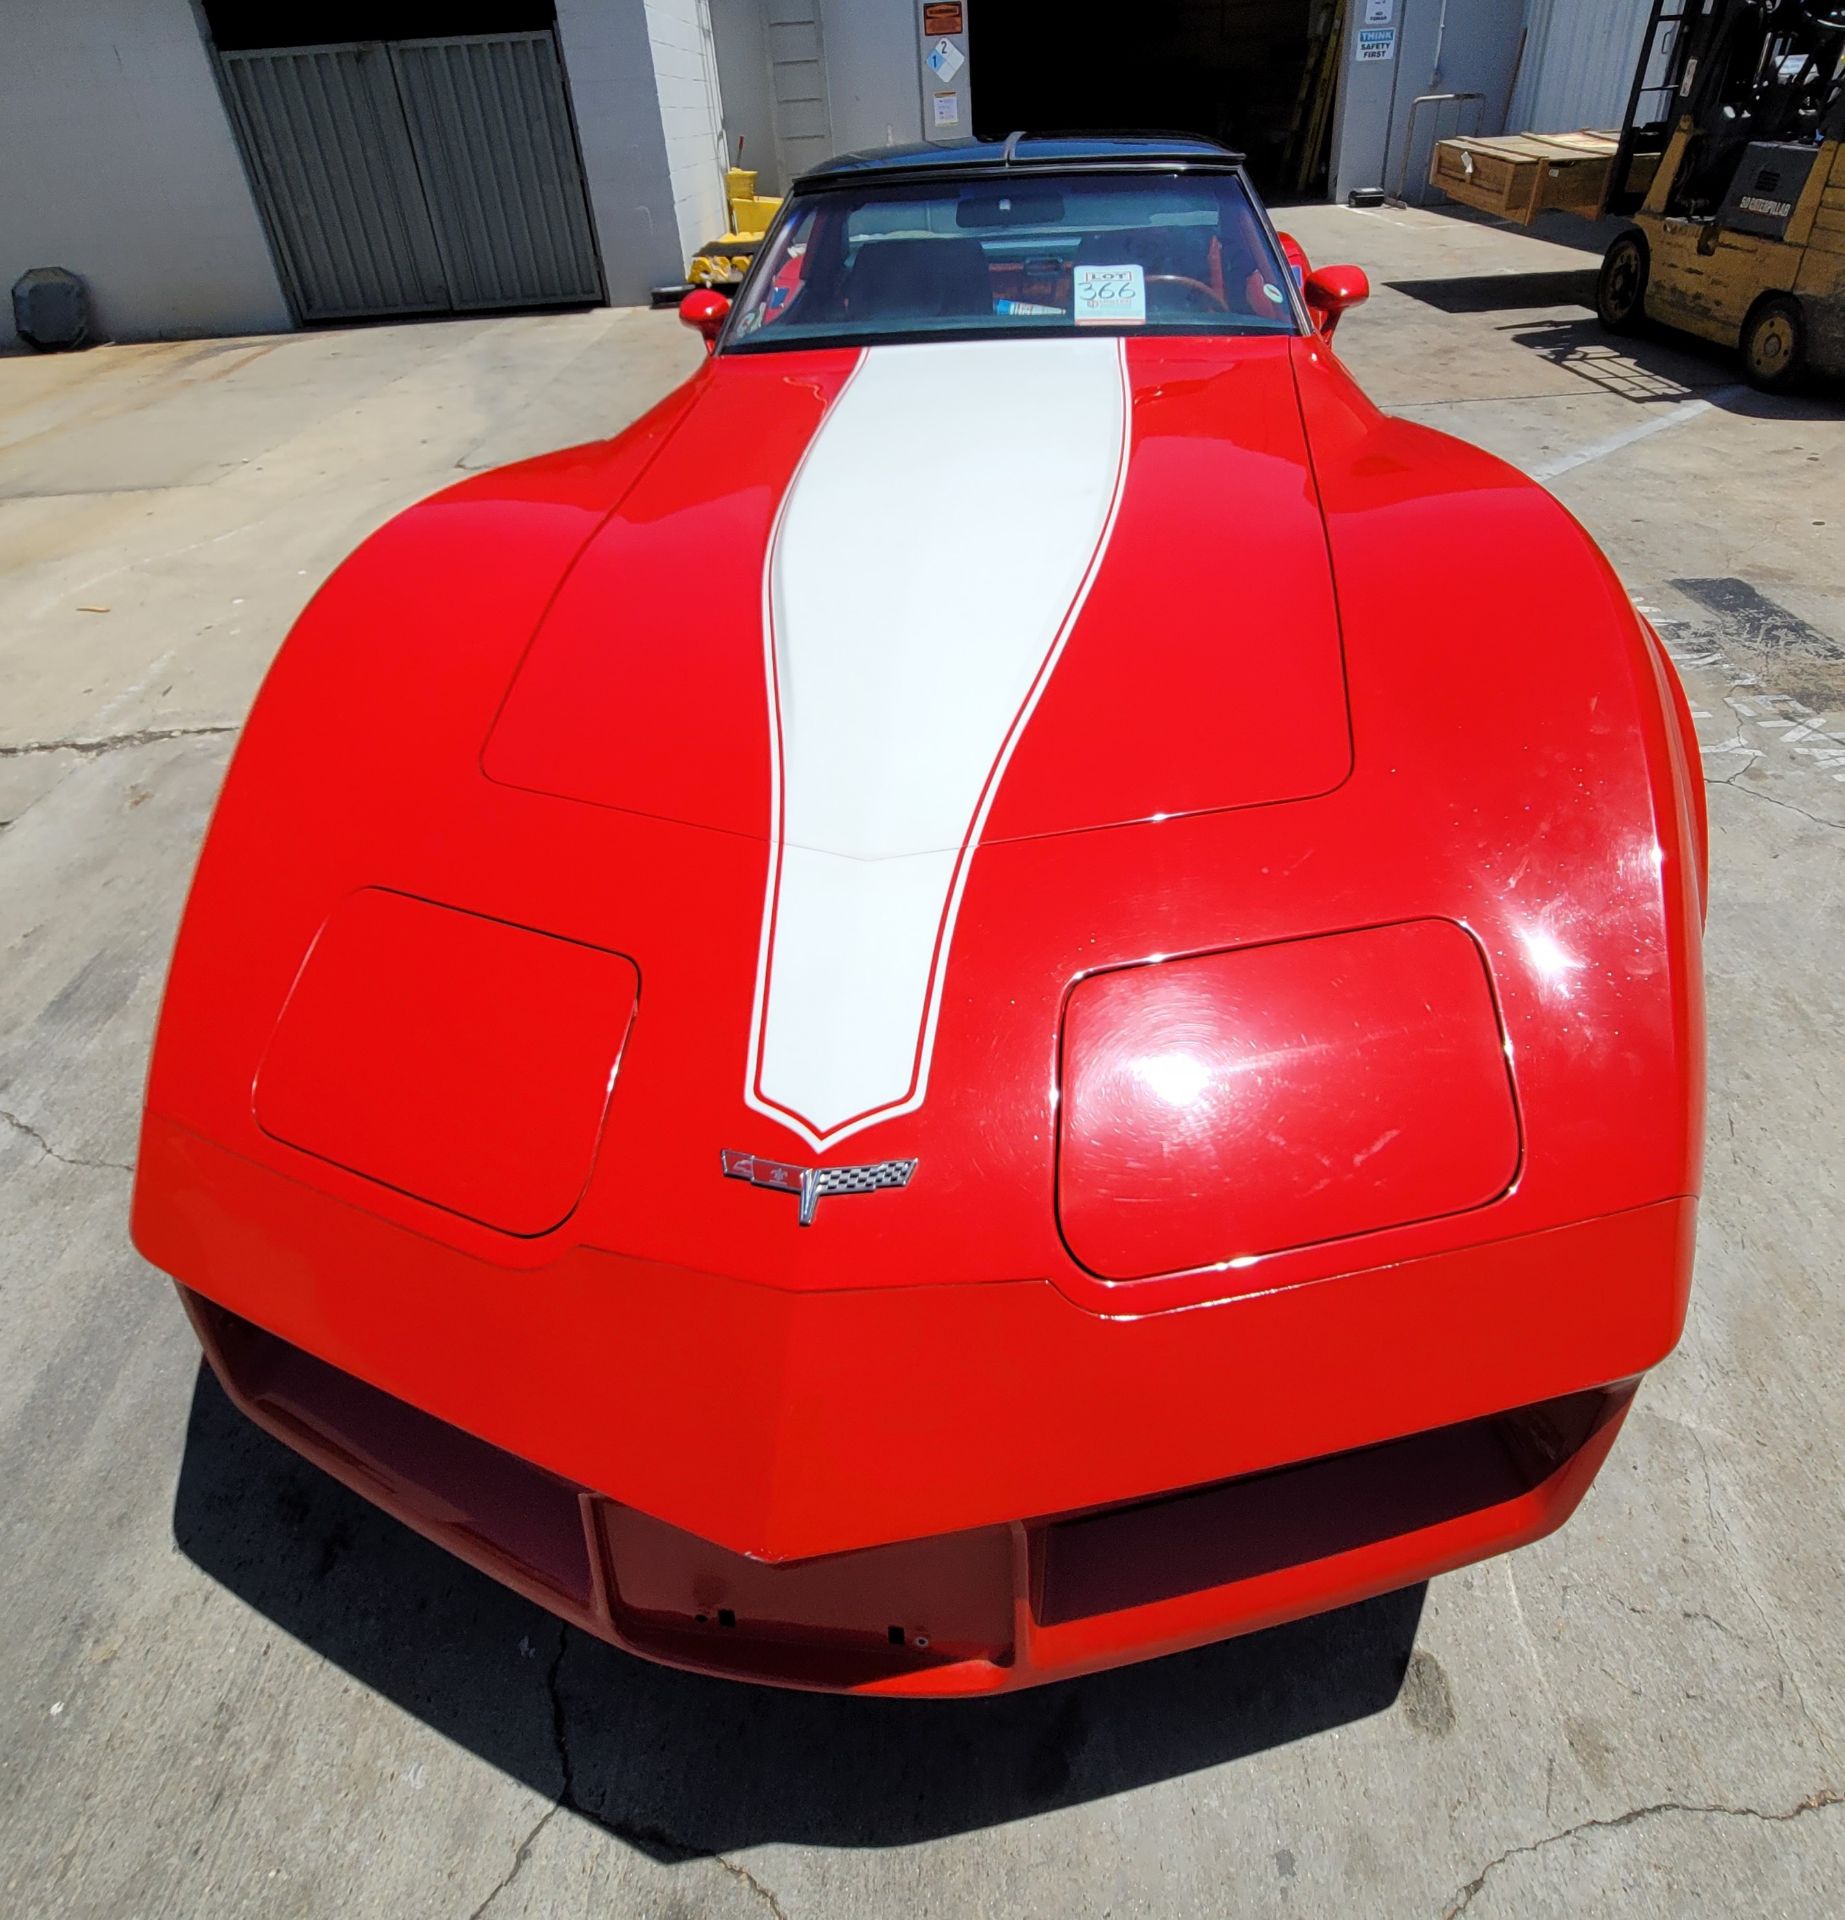 1980 CHEVROLET CORVETTE, WAS VIC EDELBROCK'S PERSONAL CAR BOUGHT FOR R&D, RED INTERIOR, TITLE ONLY. - Image 49 of 70